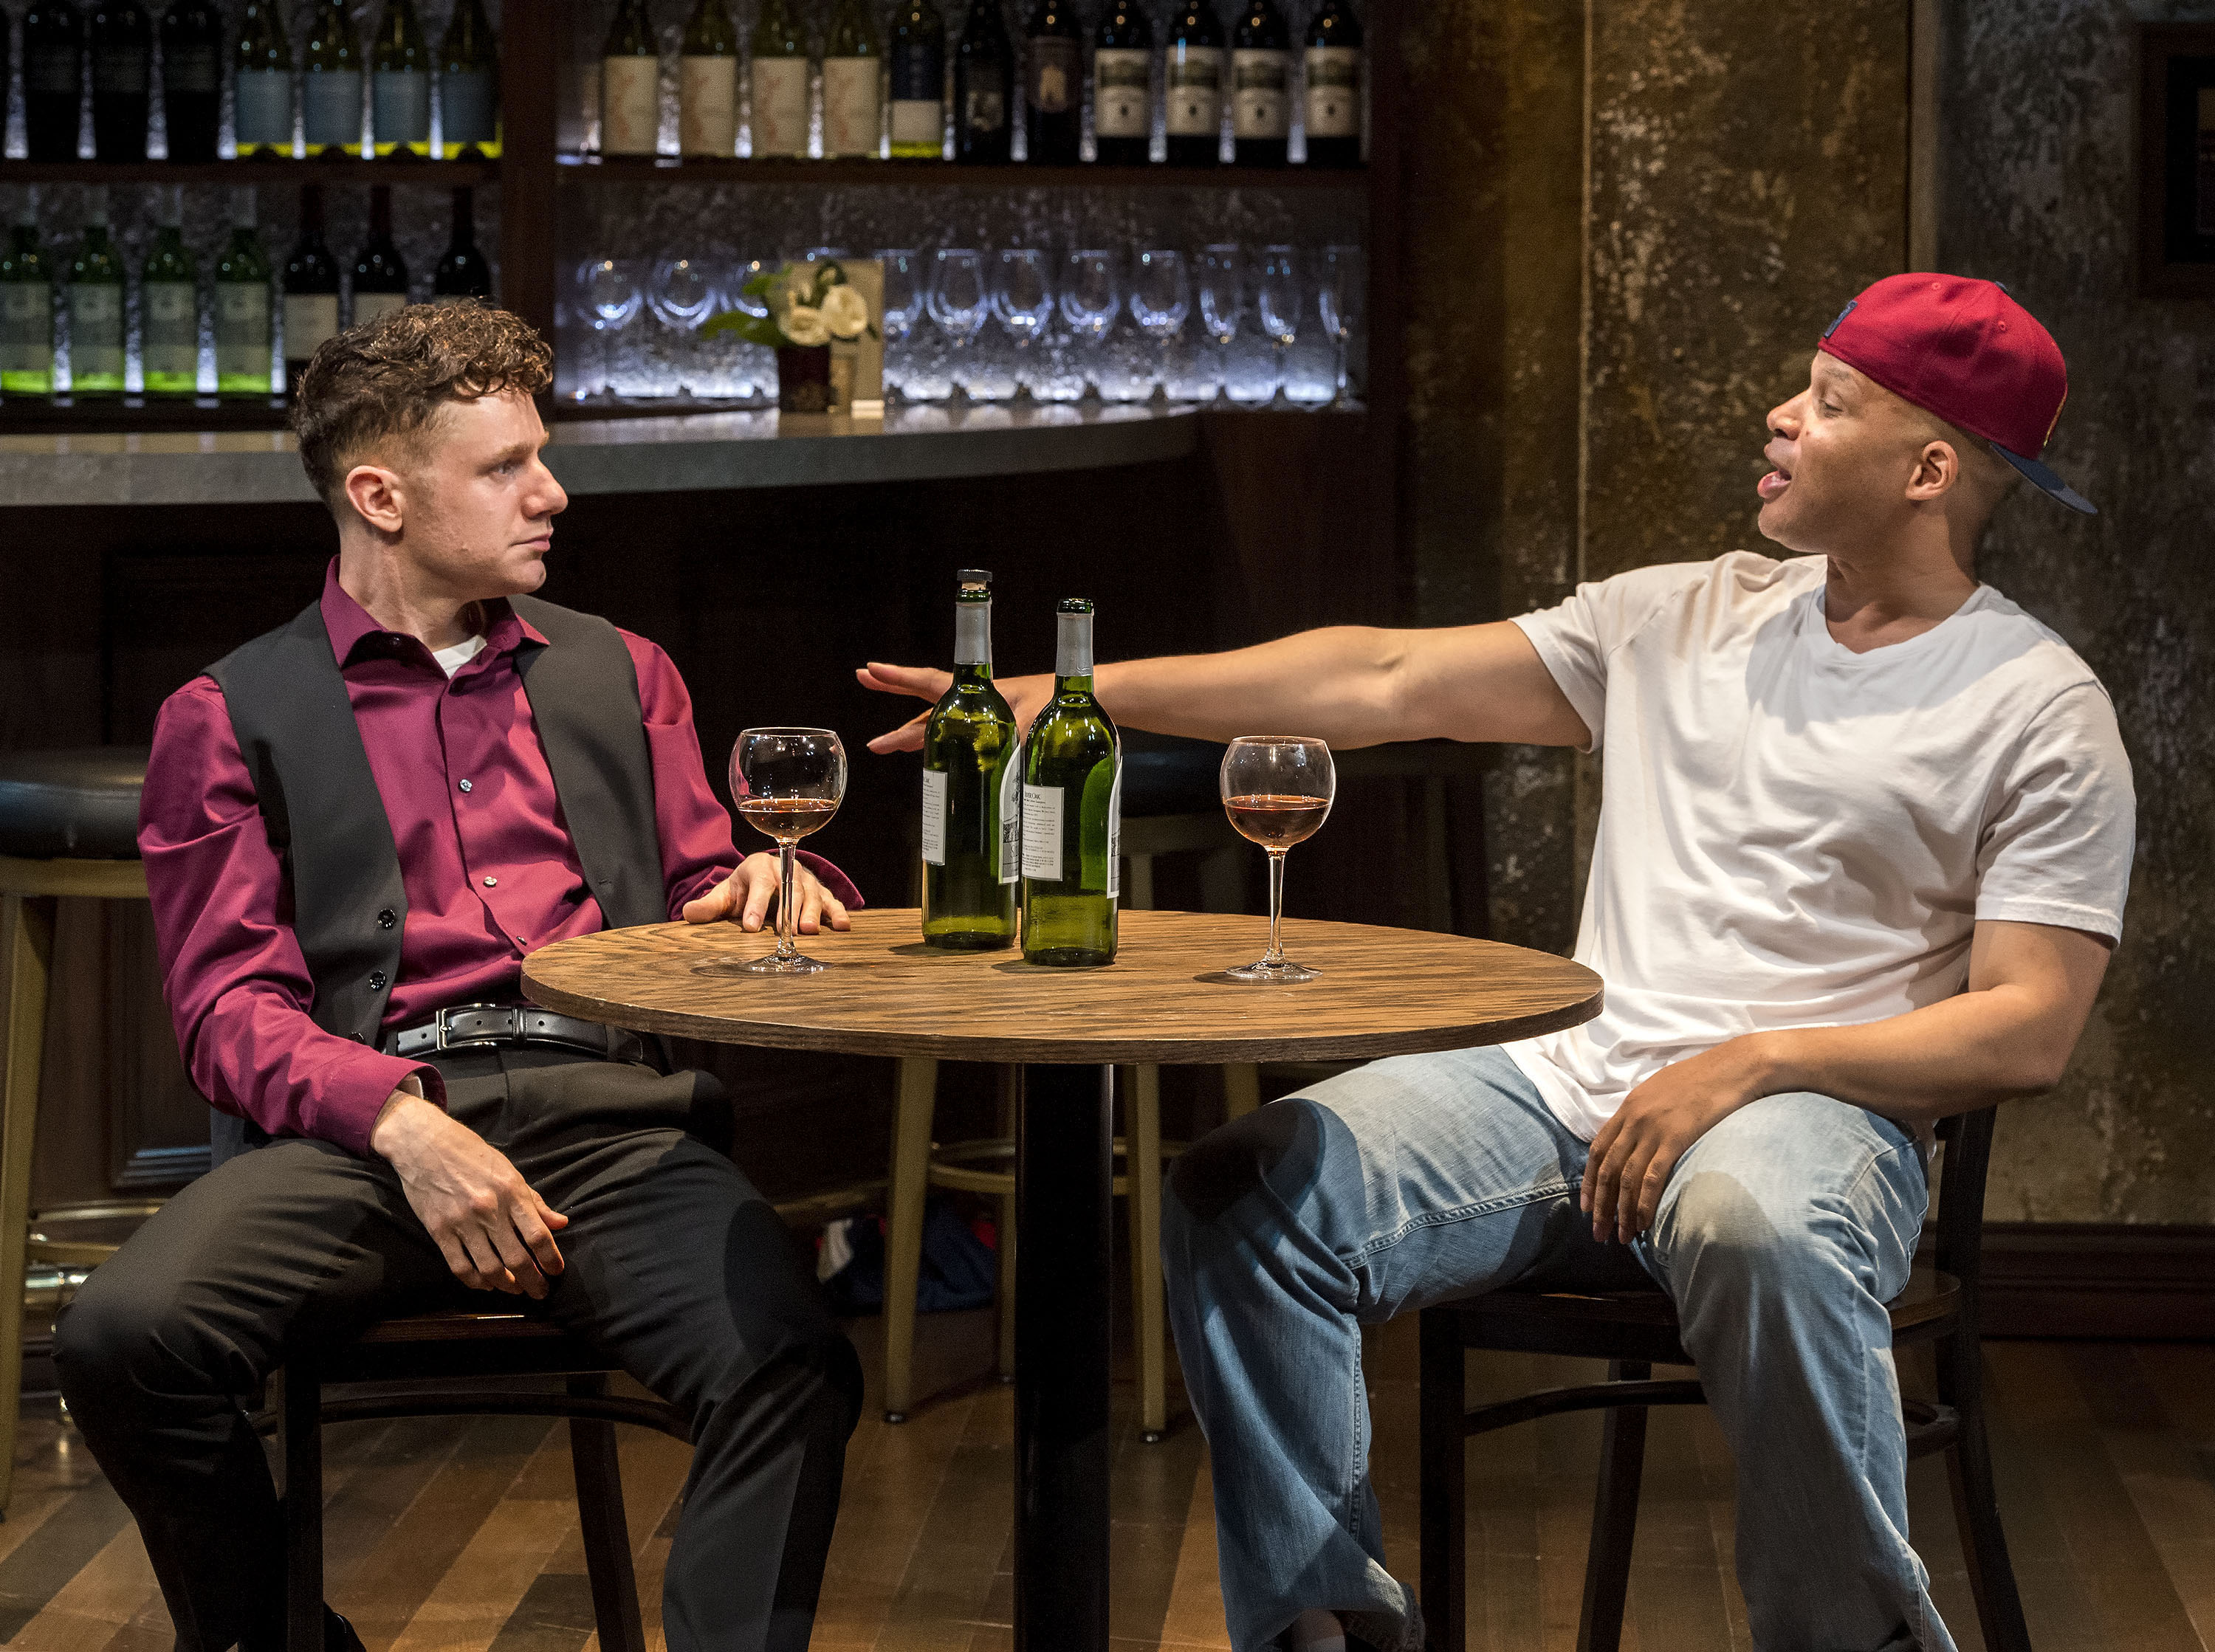 L-R: Chris Perfetti and Glenn Davis in the world premiere production of “King James” at Center Theatre Group / Mark Taper Forum June 1 through July 3, 2022. Photo credit: Craig Schwartz Photography